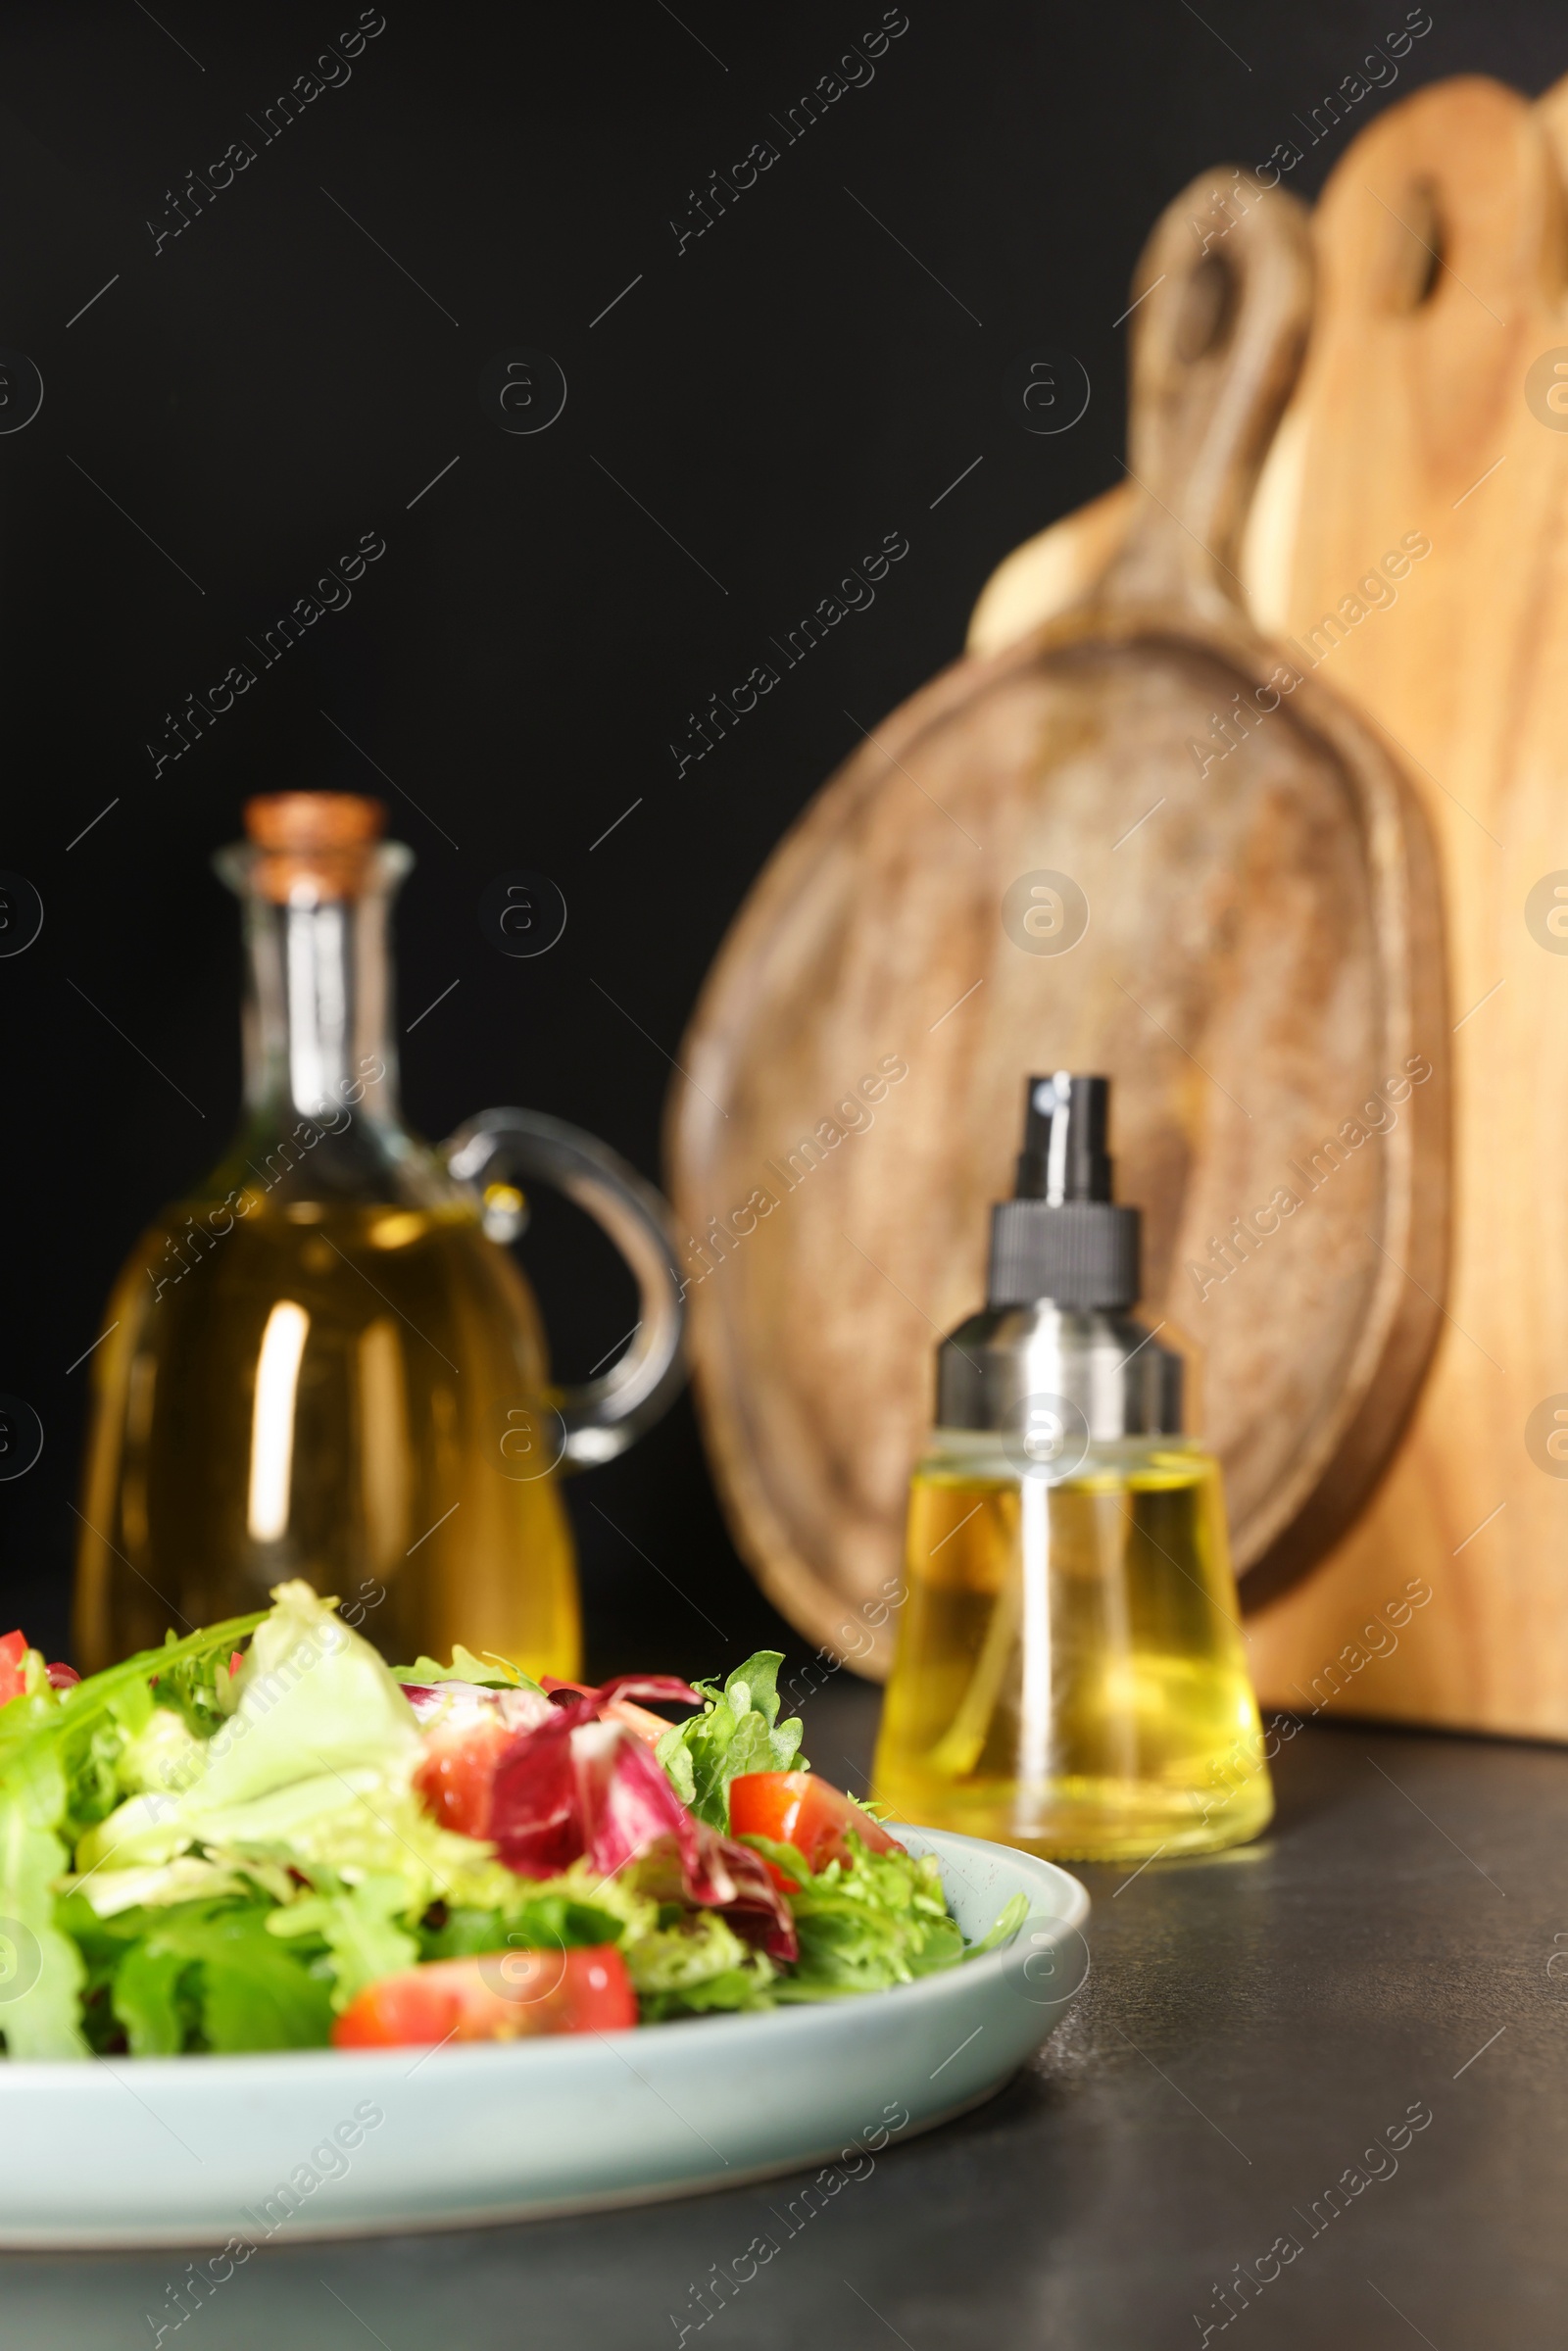 Photo of Plate of salad and bottles with cooking oil on black table in kitchen